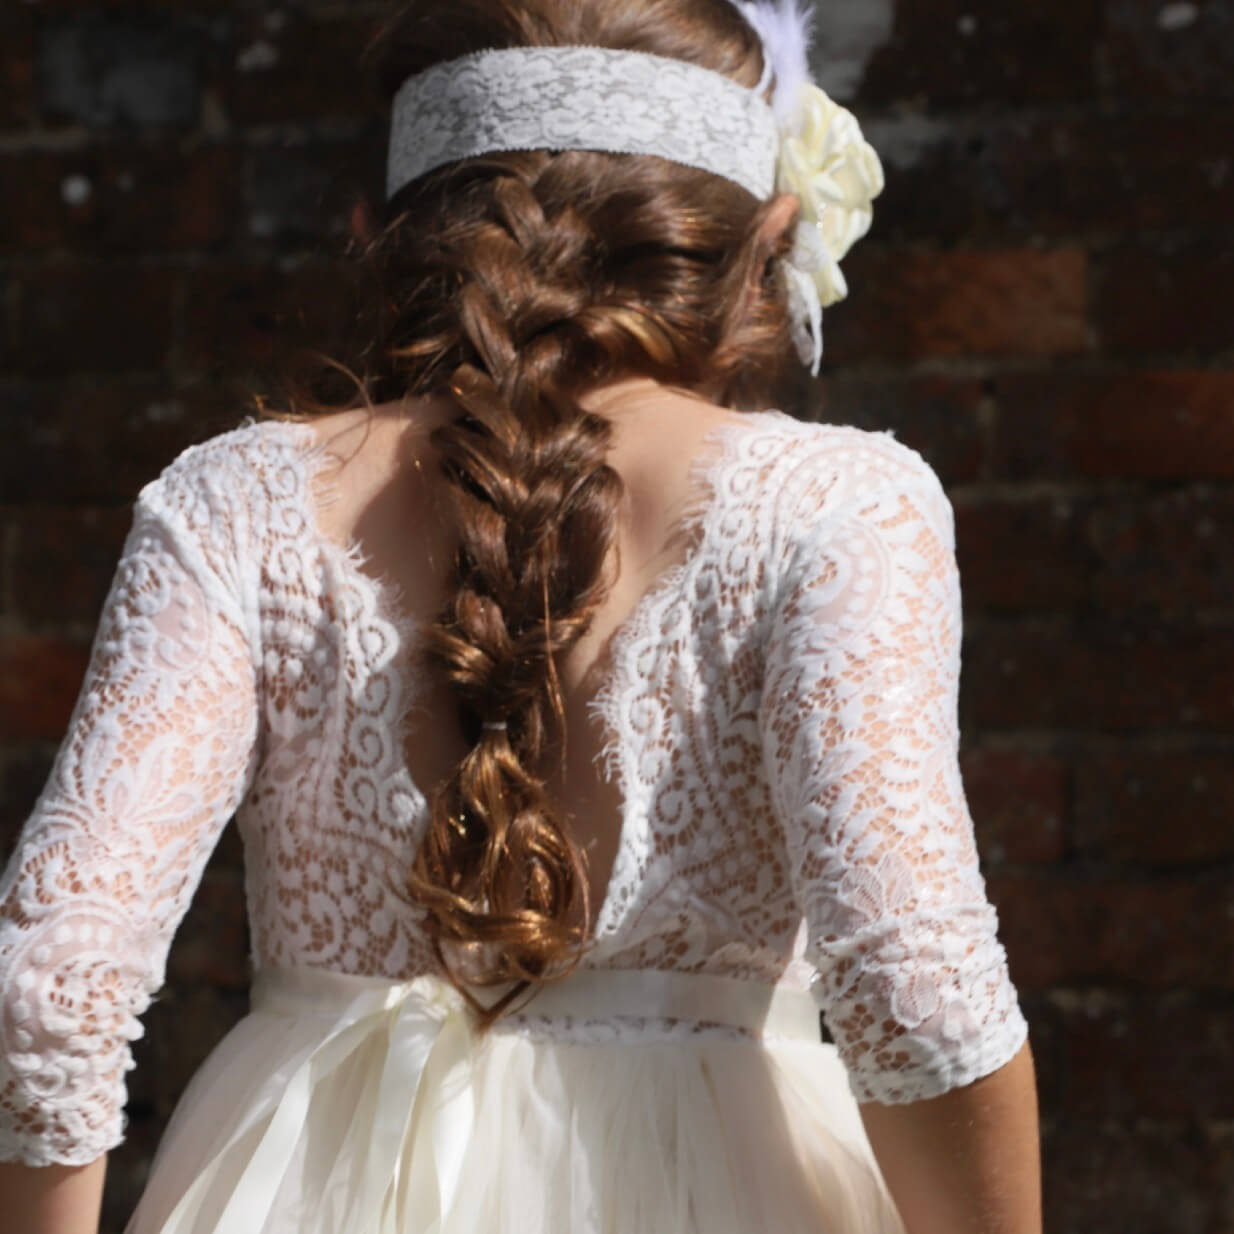 Back detailing of dress and hair